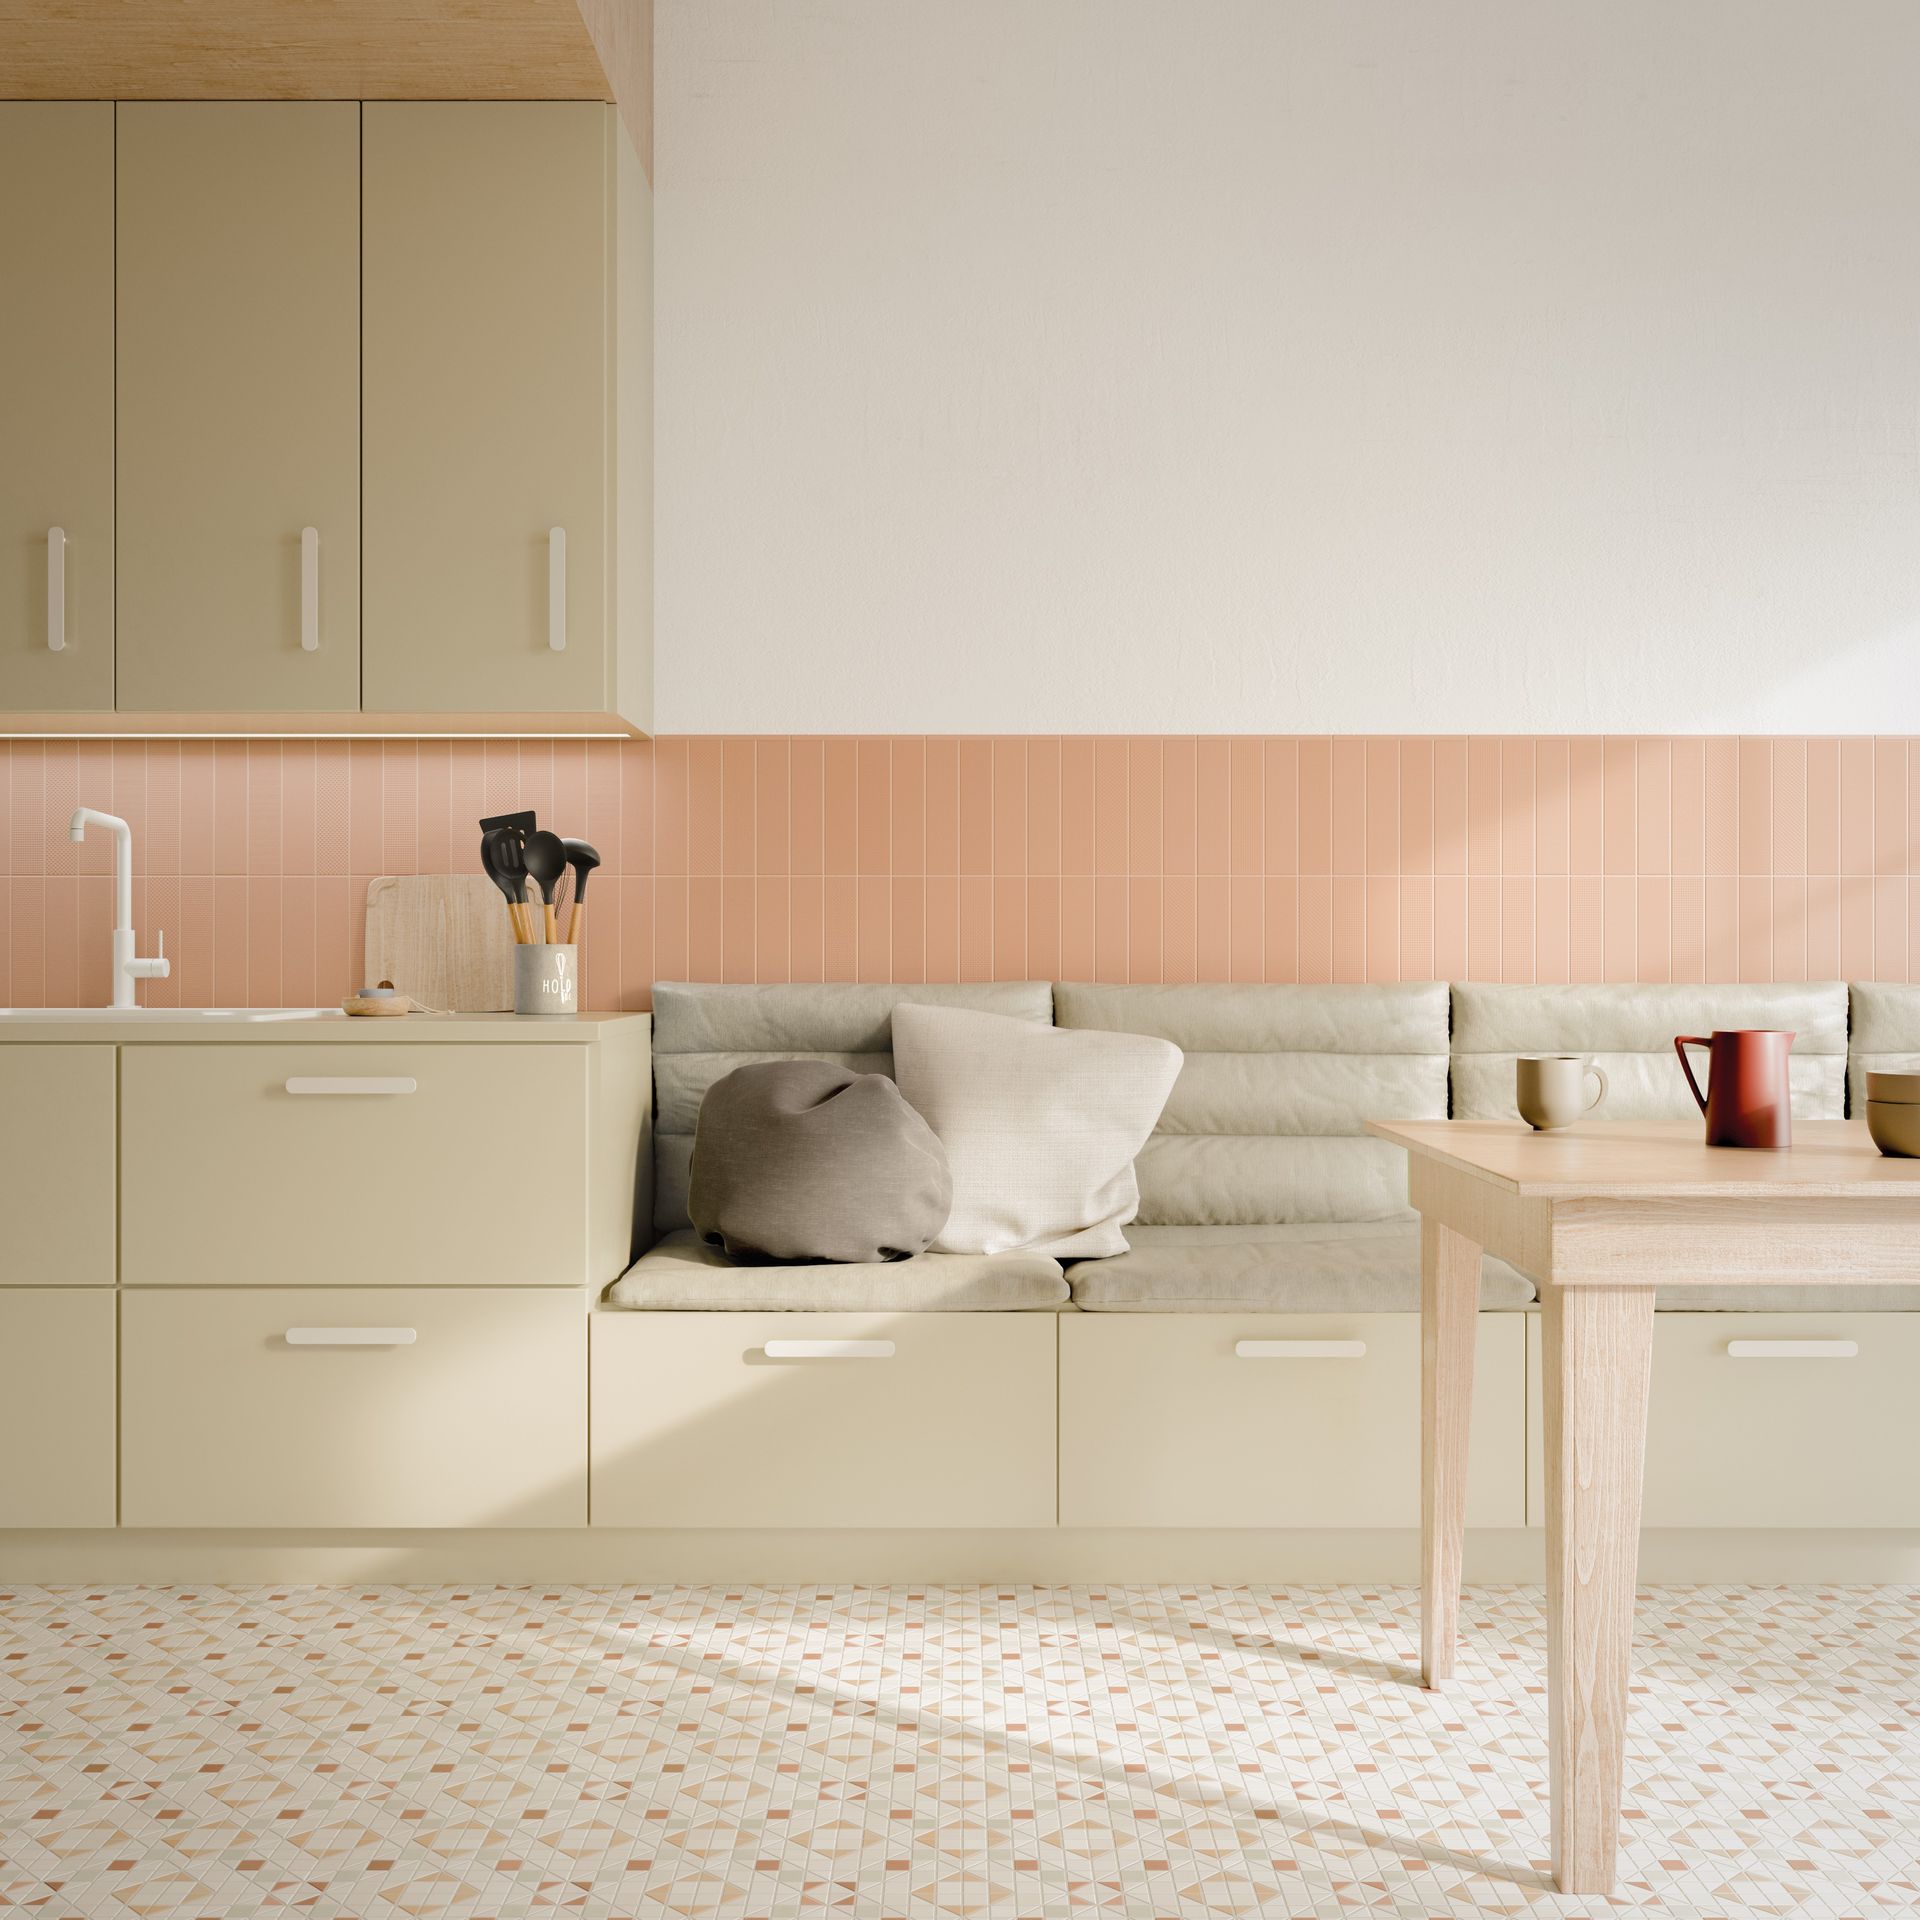 a soft coloured kitchen  with light coloured furniture and a peach coloured tile splash back